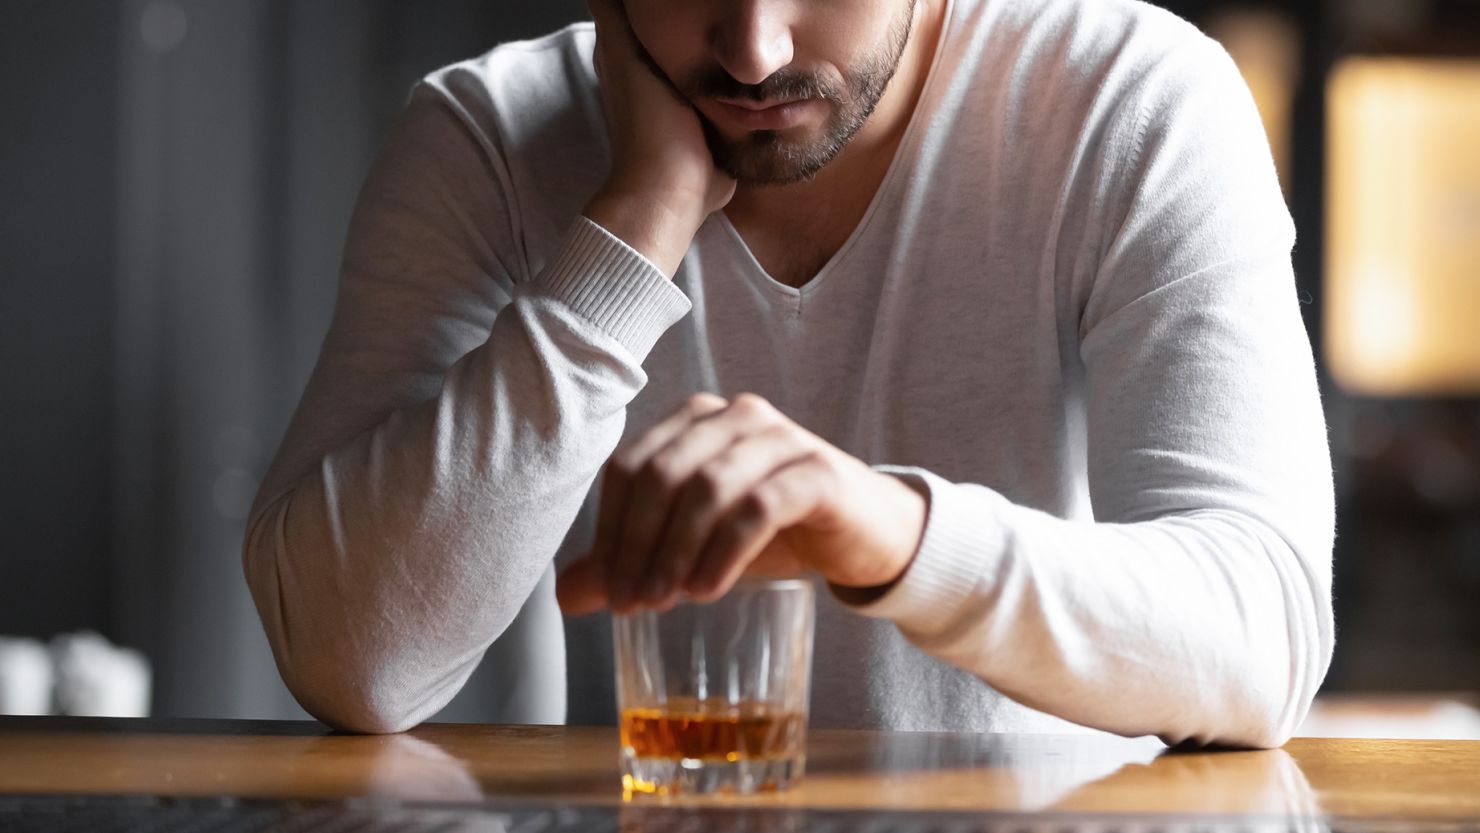 How to Cope When Your Holiday Guest Is an Alcoholic or Addict